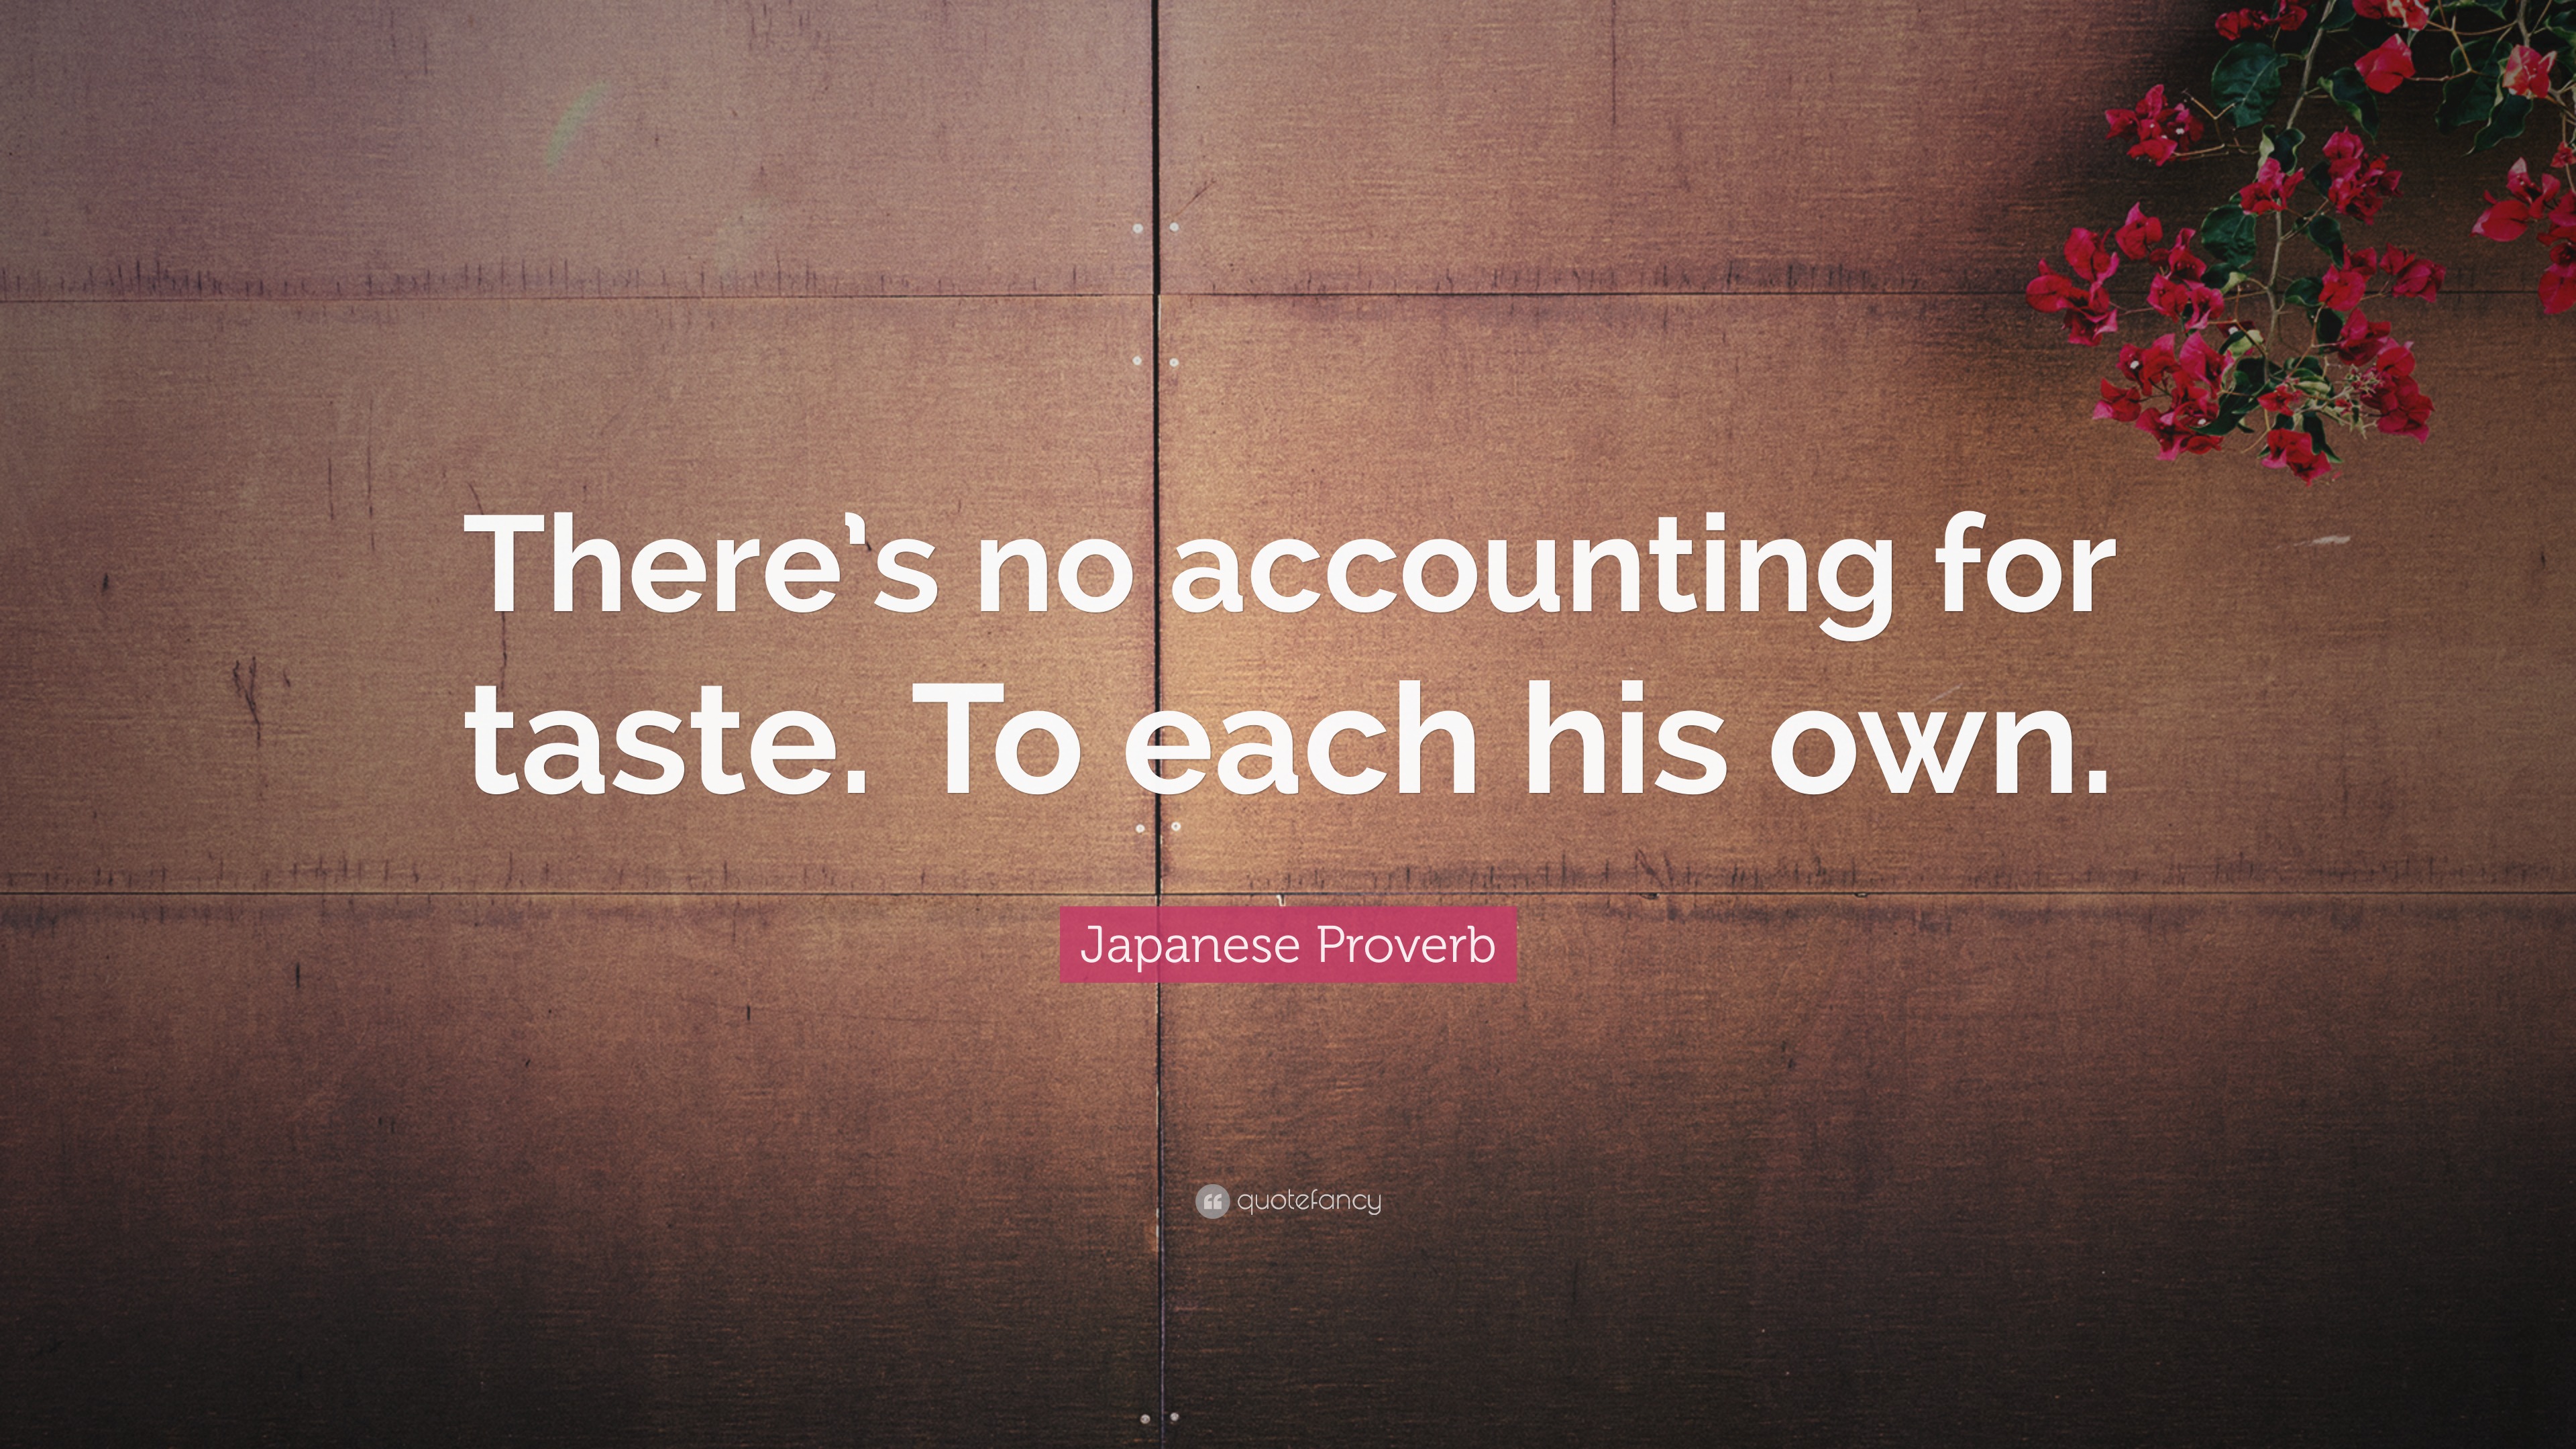 https://quotefancy.com/media/wallpaper/3840x2160/8149858-Japanese-Proverb-Quote-There-s-no-accounting-for-taste-To-each-his-own.jpg